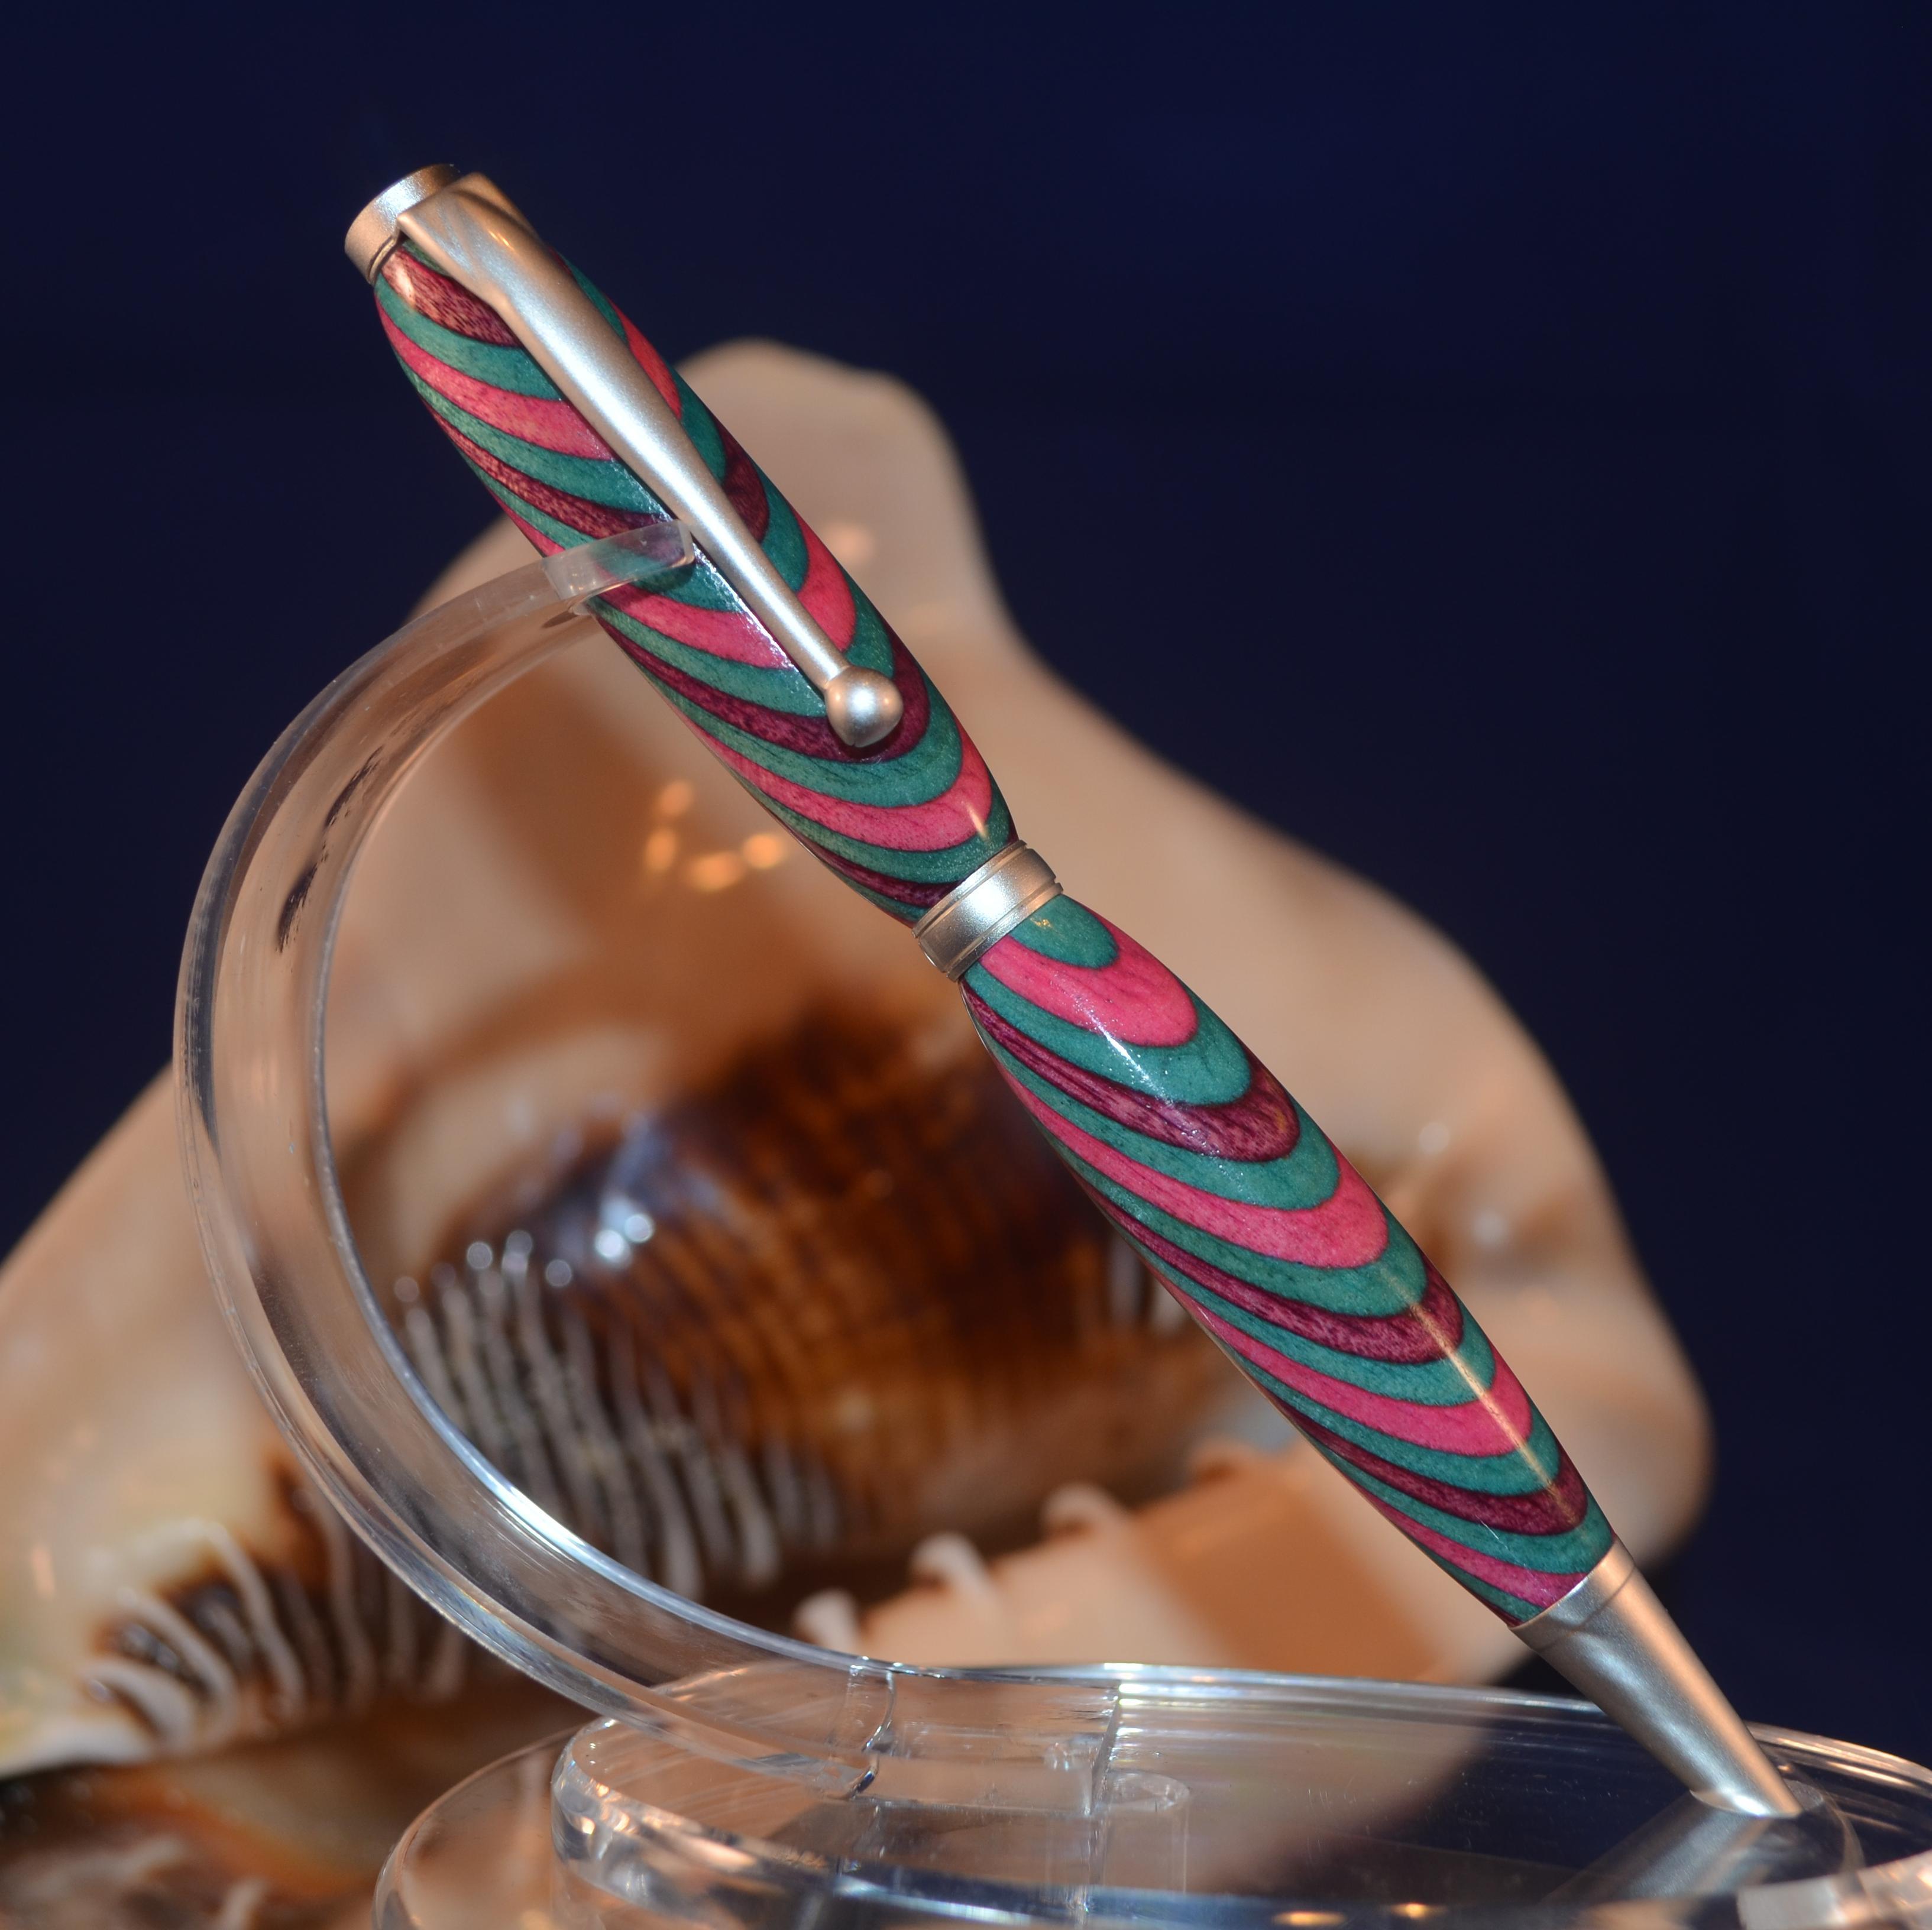 Reviving the gift of pen giving by providing a beautiful selection from collections far and wide as well as handmade.